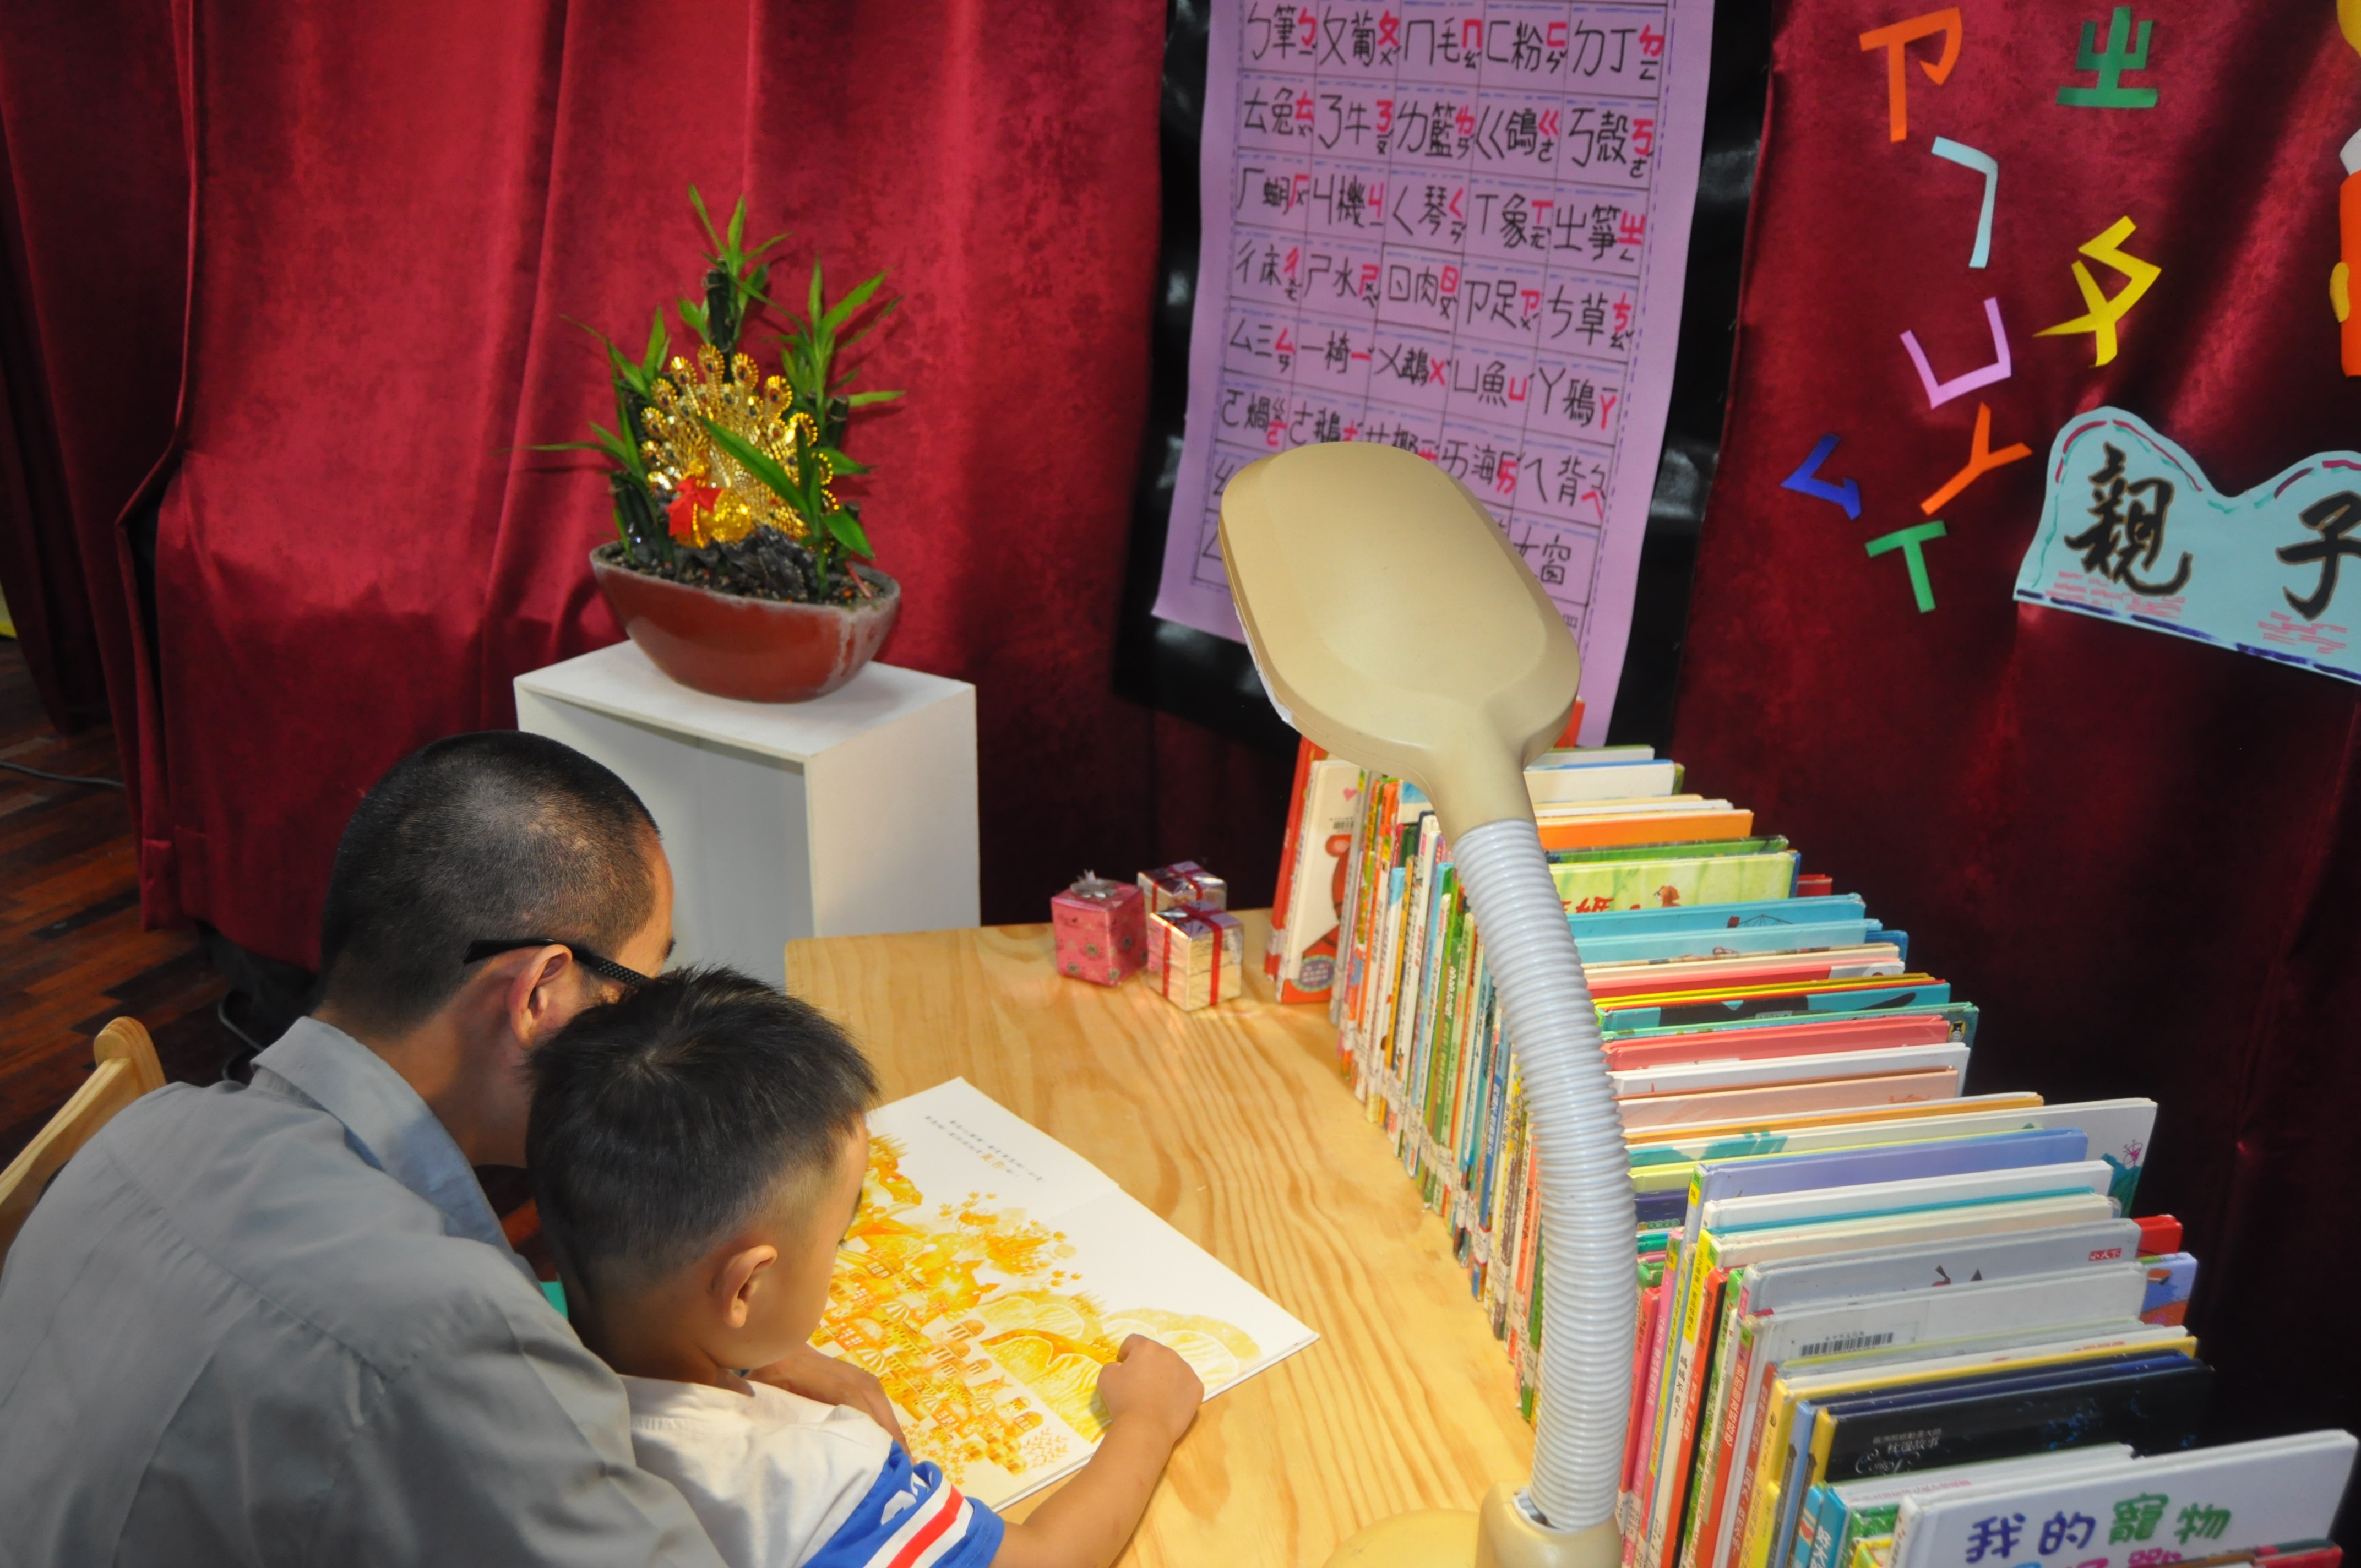 Taichung Detention Center prepared many picture books which the inmates and their children could read toghther.